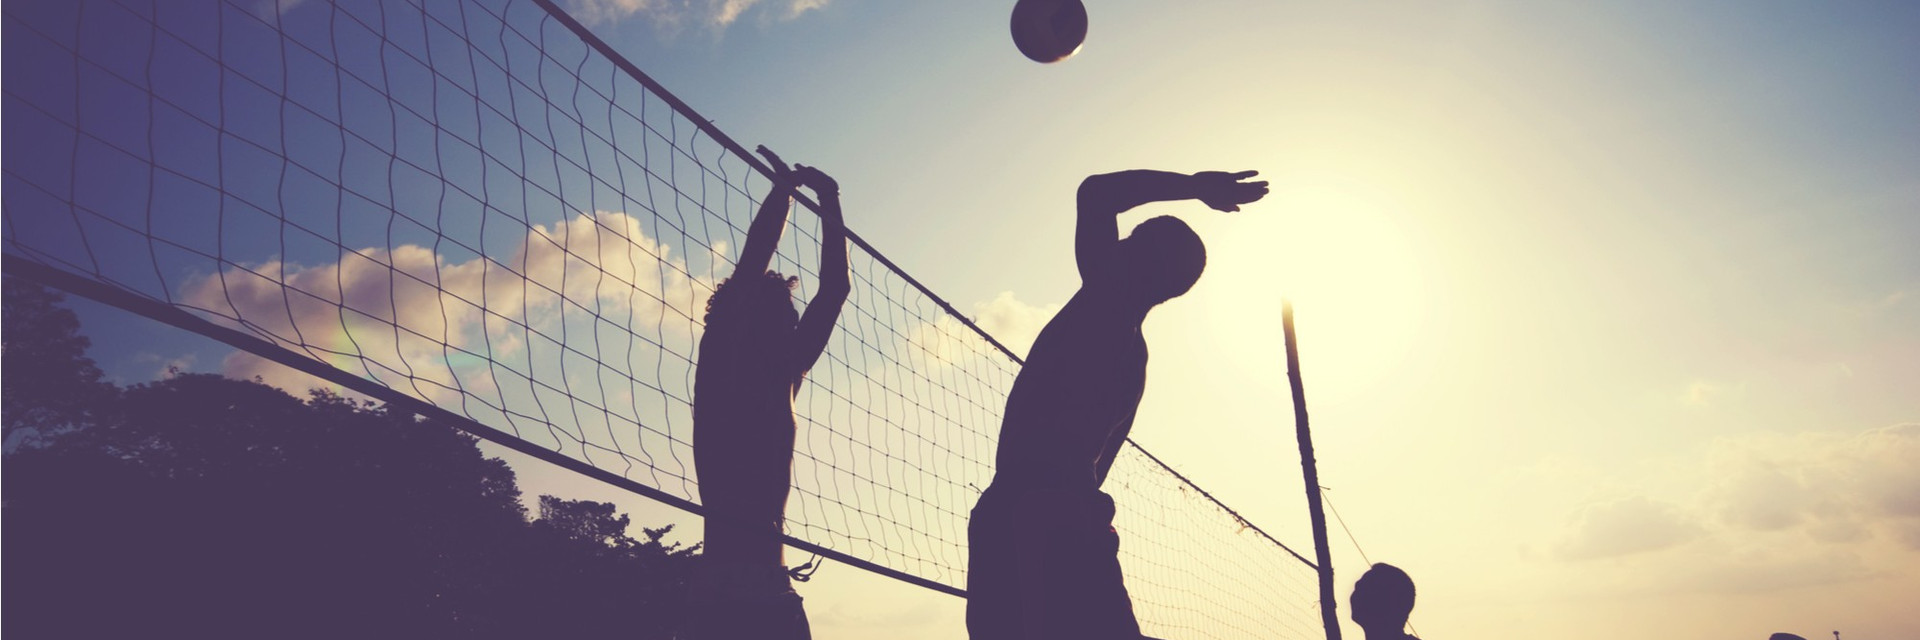 Prevent, Identify & Treat Common Volleyball Injuries With These 3 Steps ...